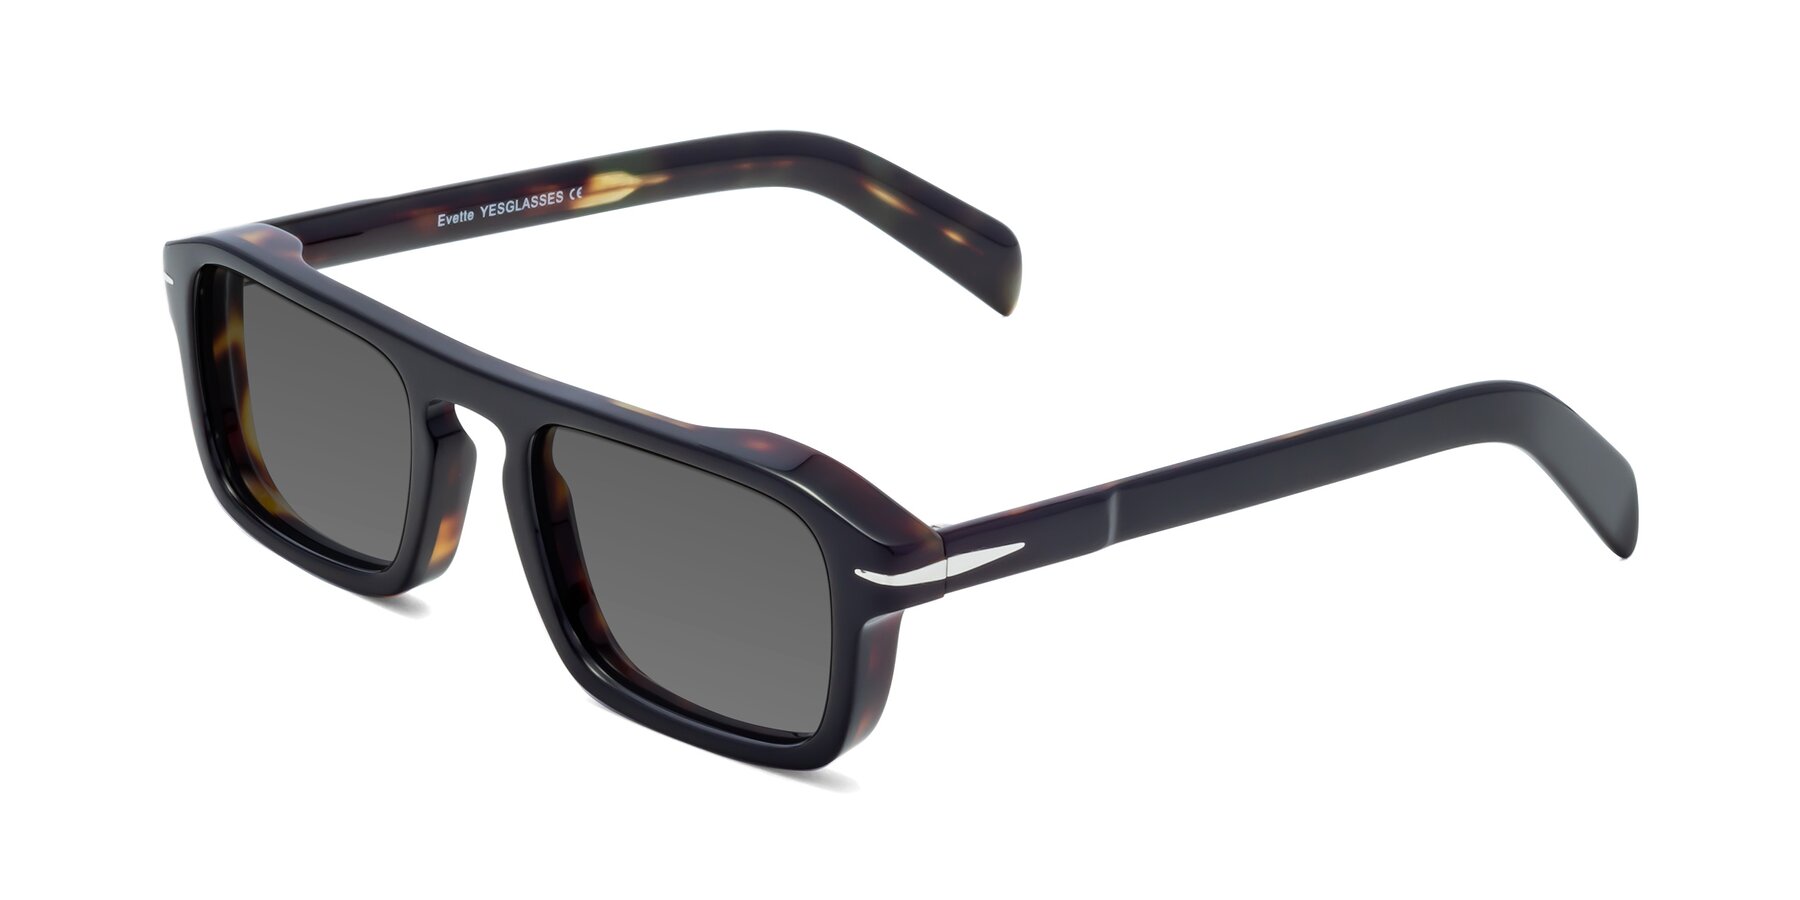 Angle of Evette in Black-Tortoise with Medium Gray Tinted Lenses